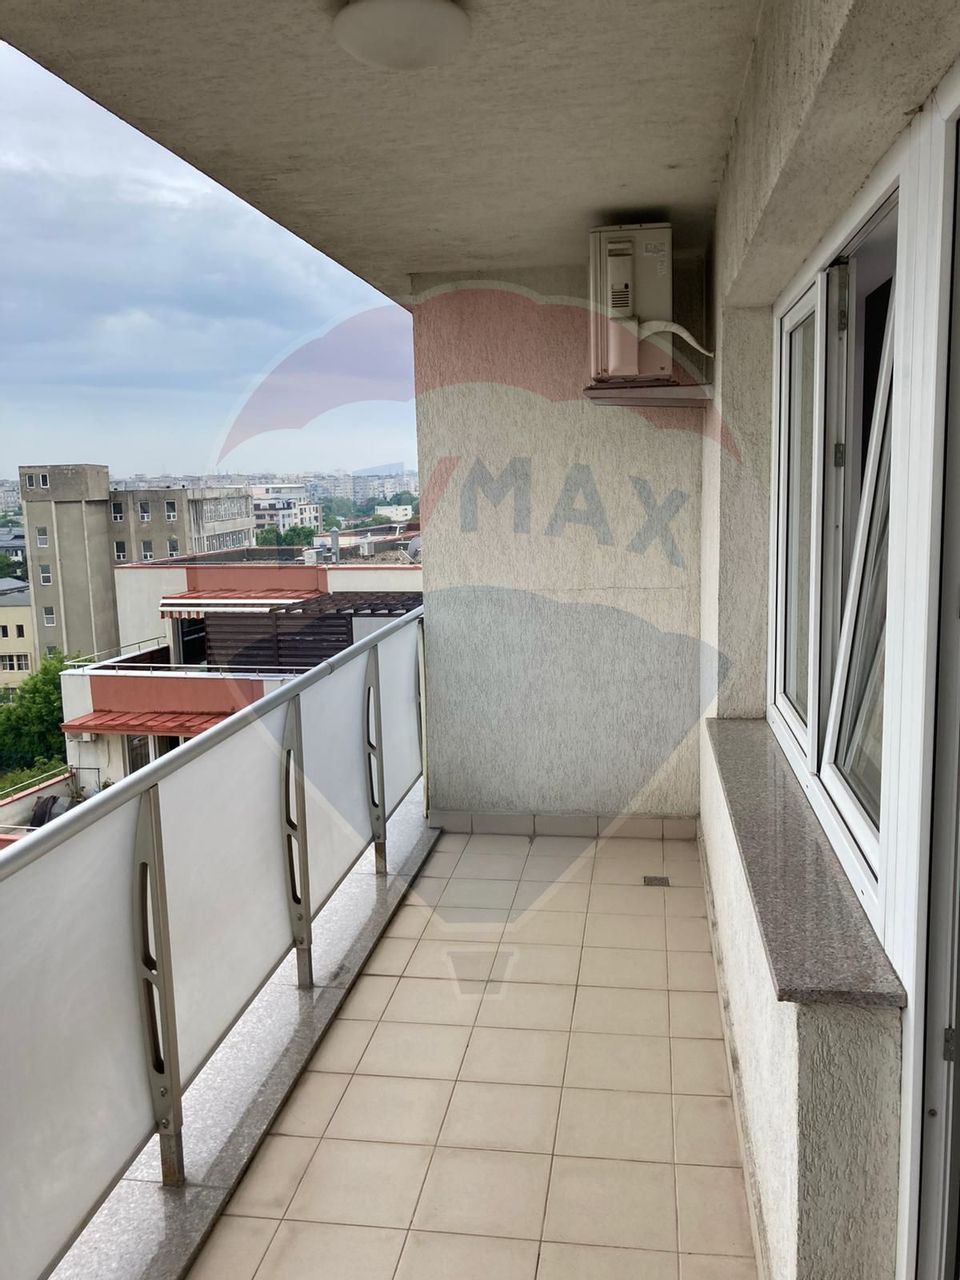 1 BDR Apartment for rent, Vitan Mall area